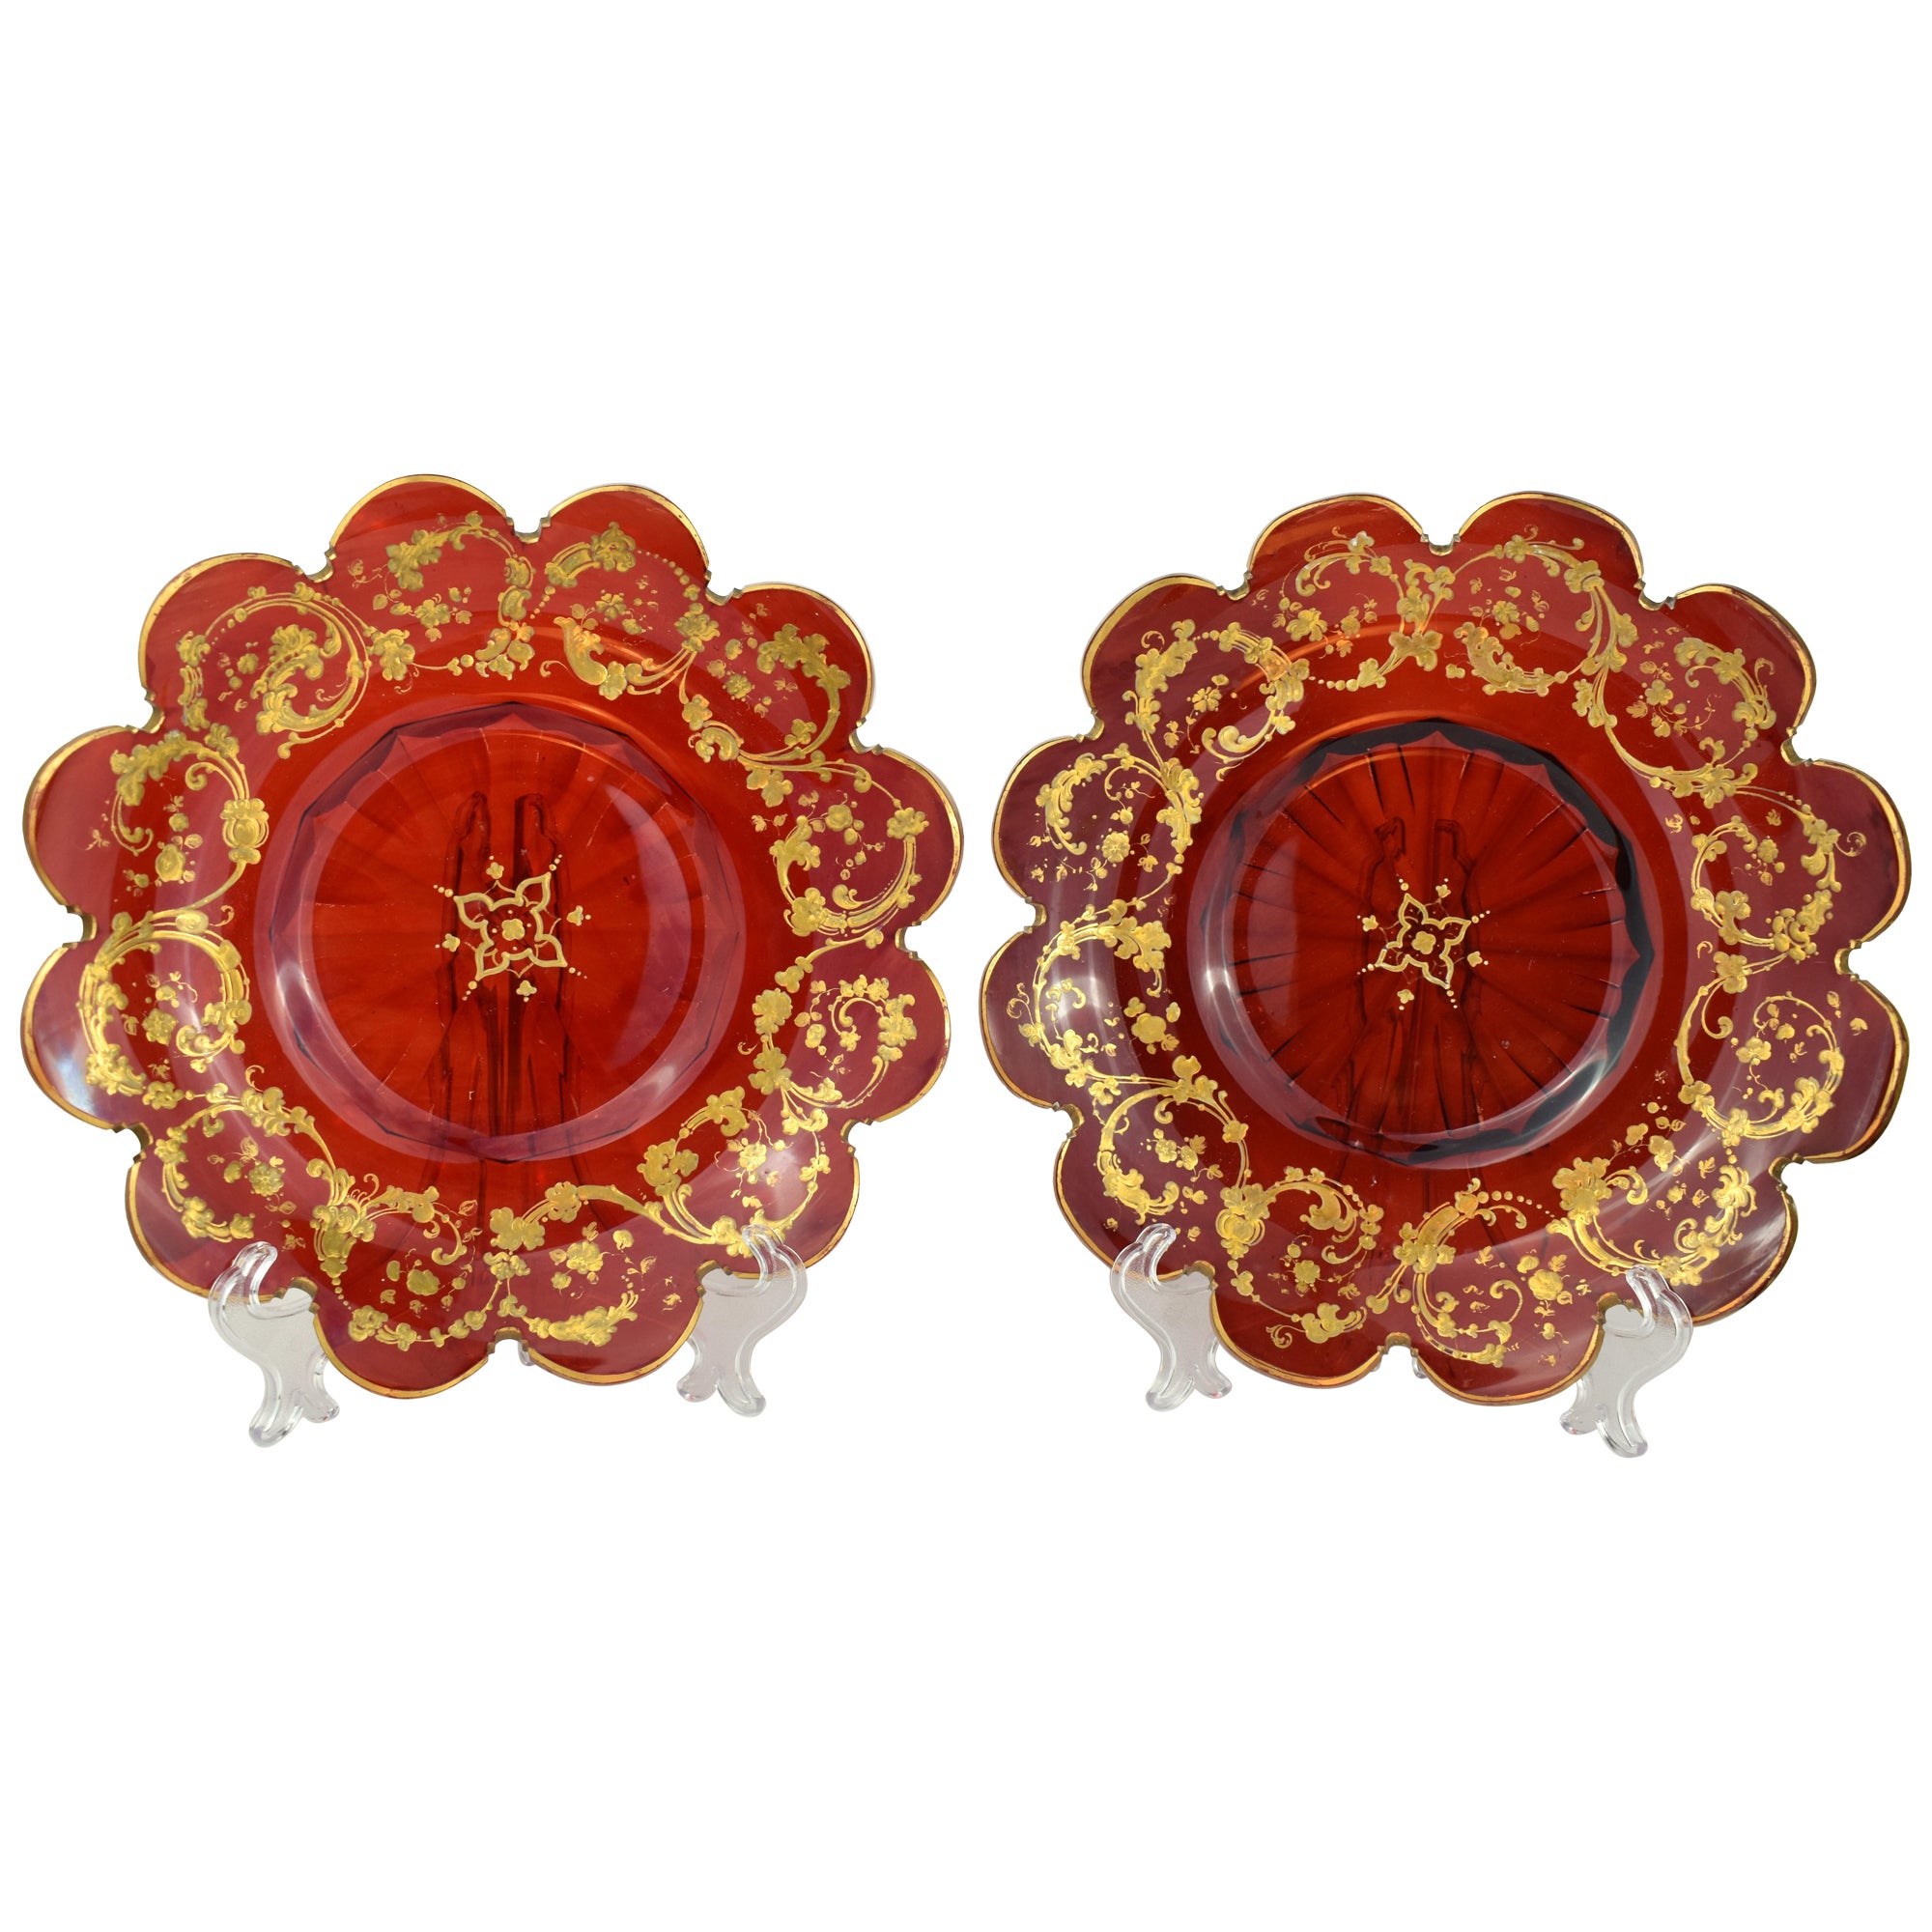 PAIR OF ANTIQUE BOHEMIAN RUBY RED ENAMELED CRYSTAL GLASS PLATES, 19th CENTURY For Sale